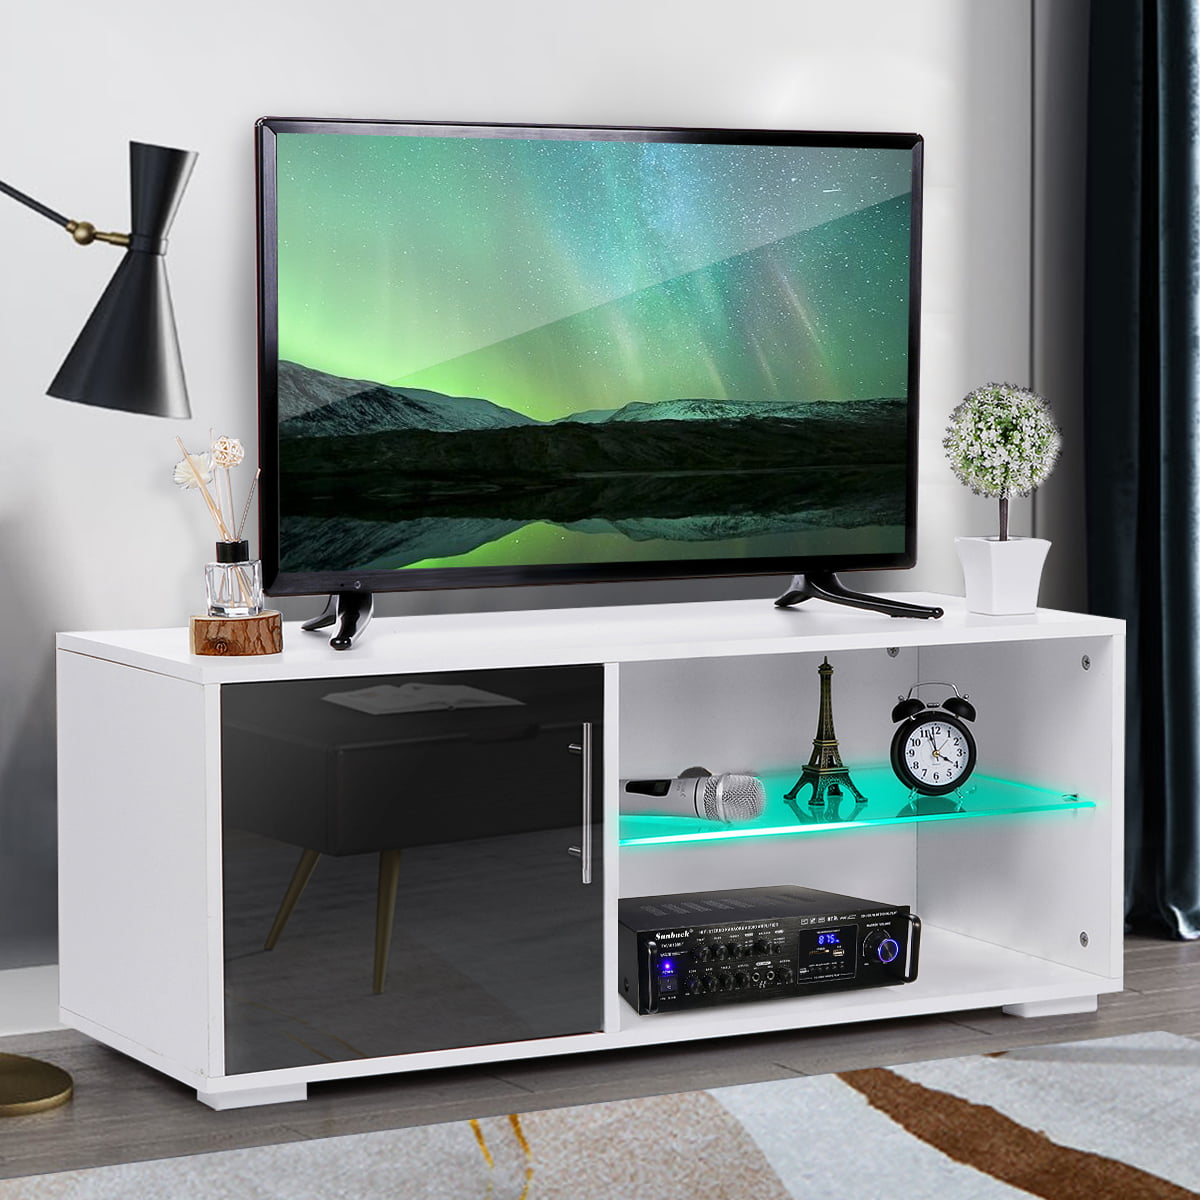 39" Modern High Gloss TV Stand Cabinet with LED Shelves ...